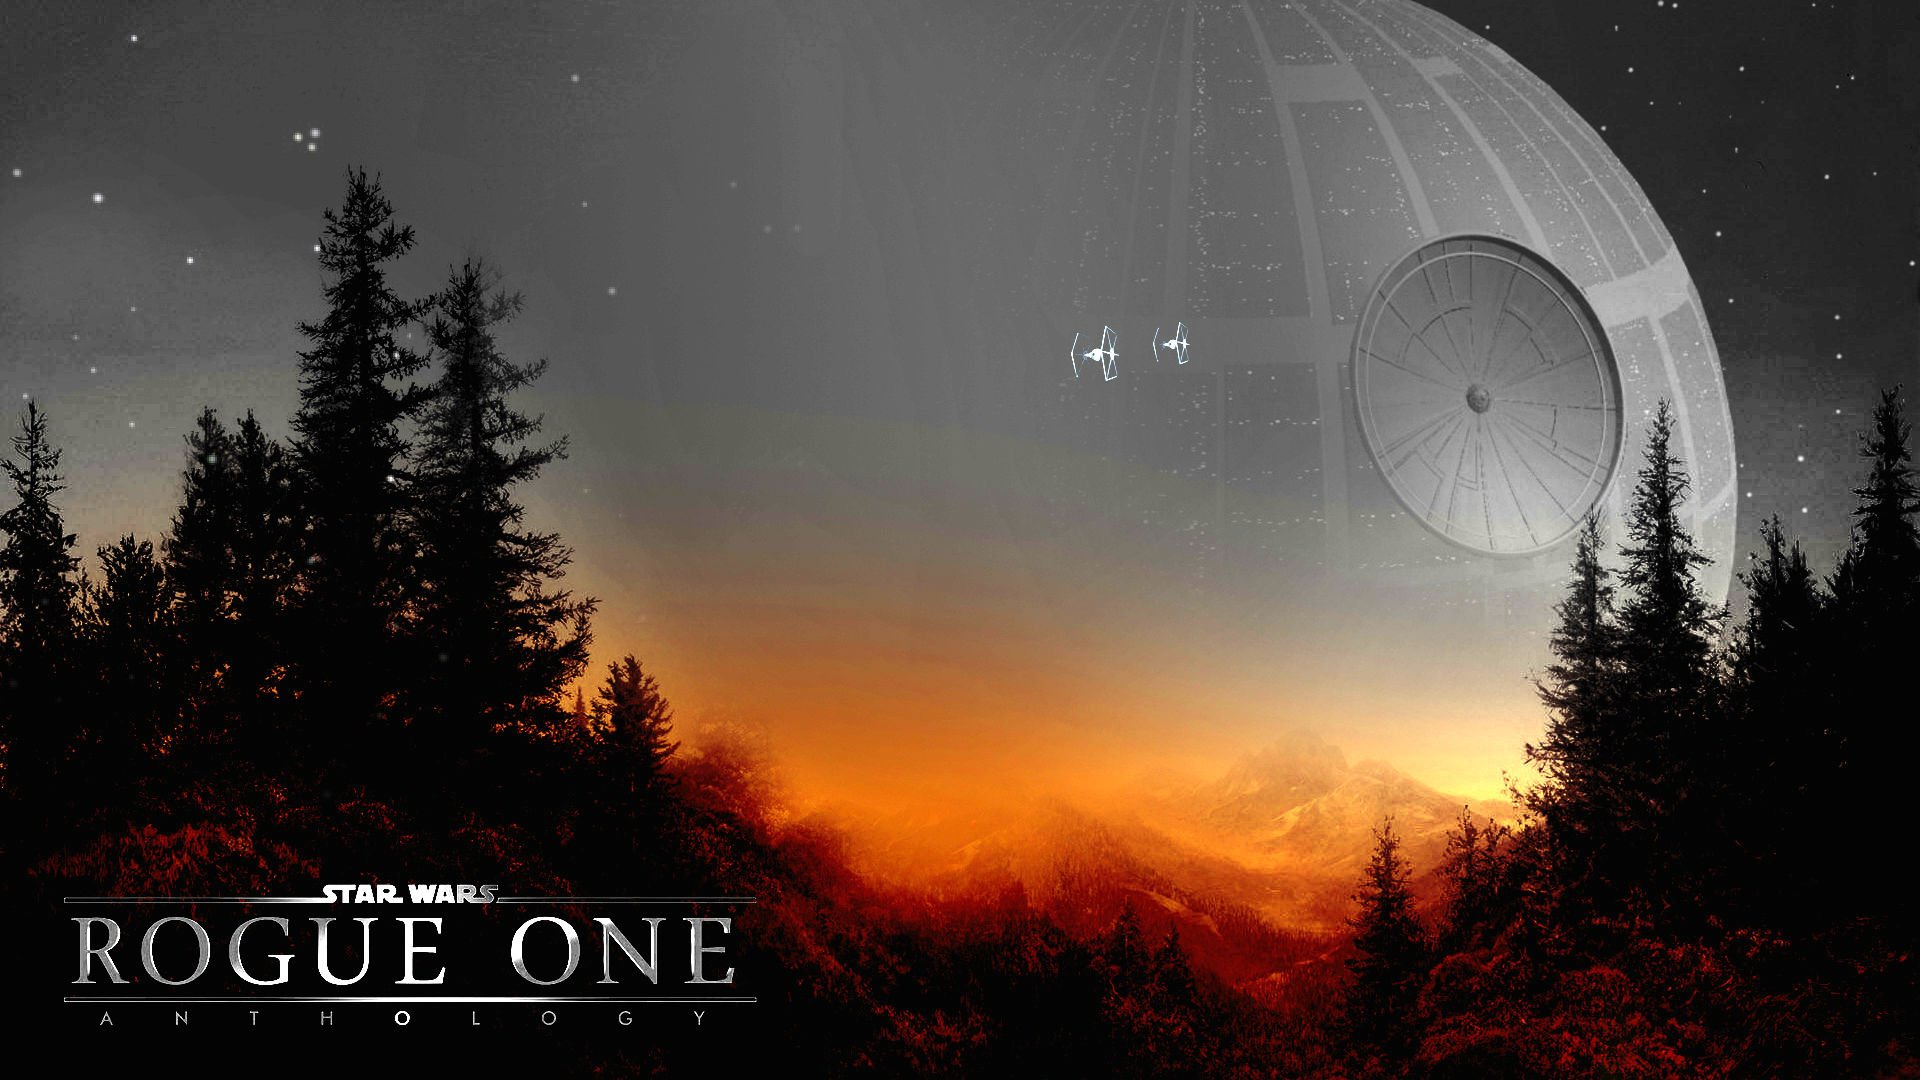 rogue, One, Star, Wars, Story, Sci fi, Space, Futuristic, Opera, 1rosw, Disney, Action, Fighting, Poster, Spaceship Wallpaper